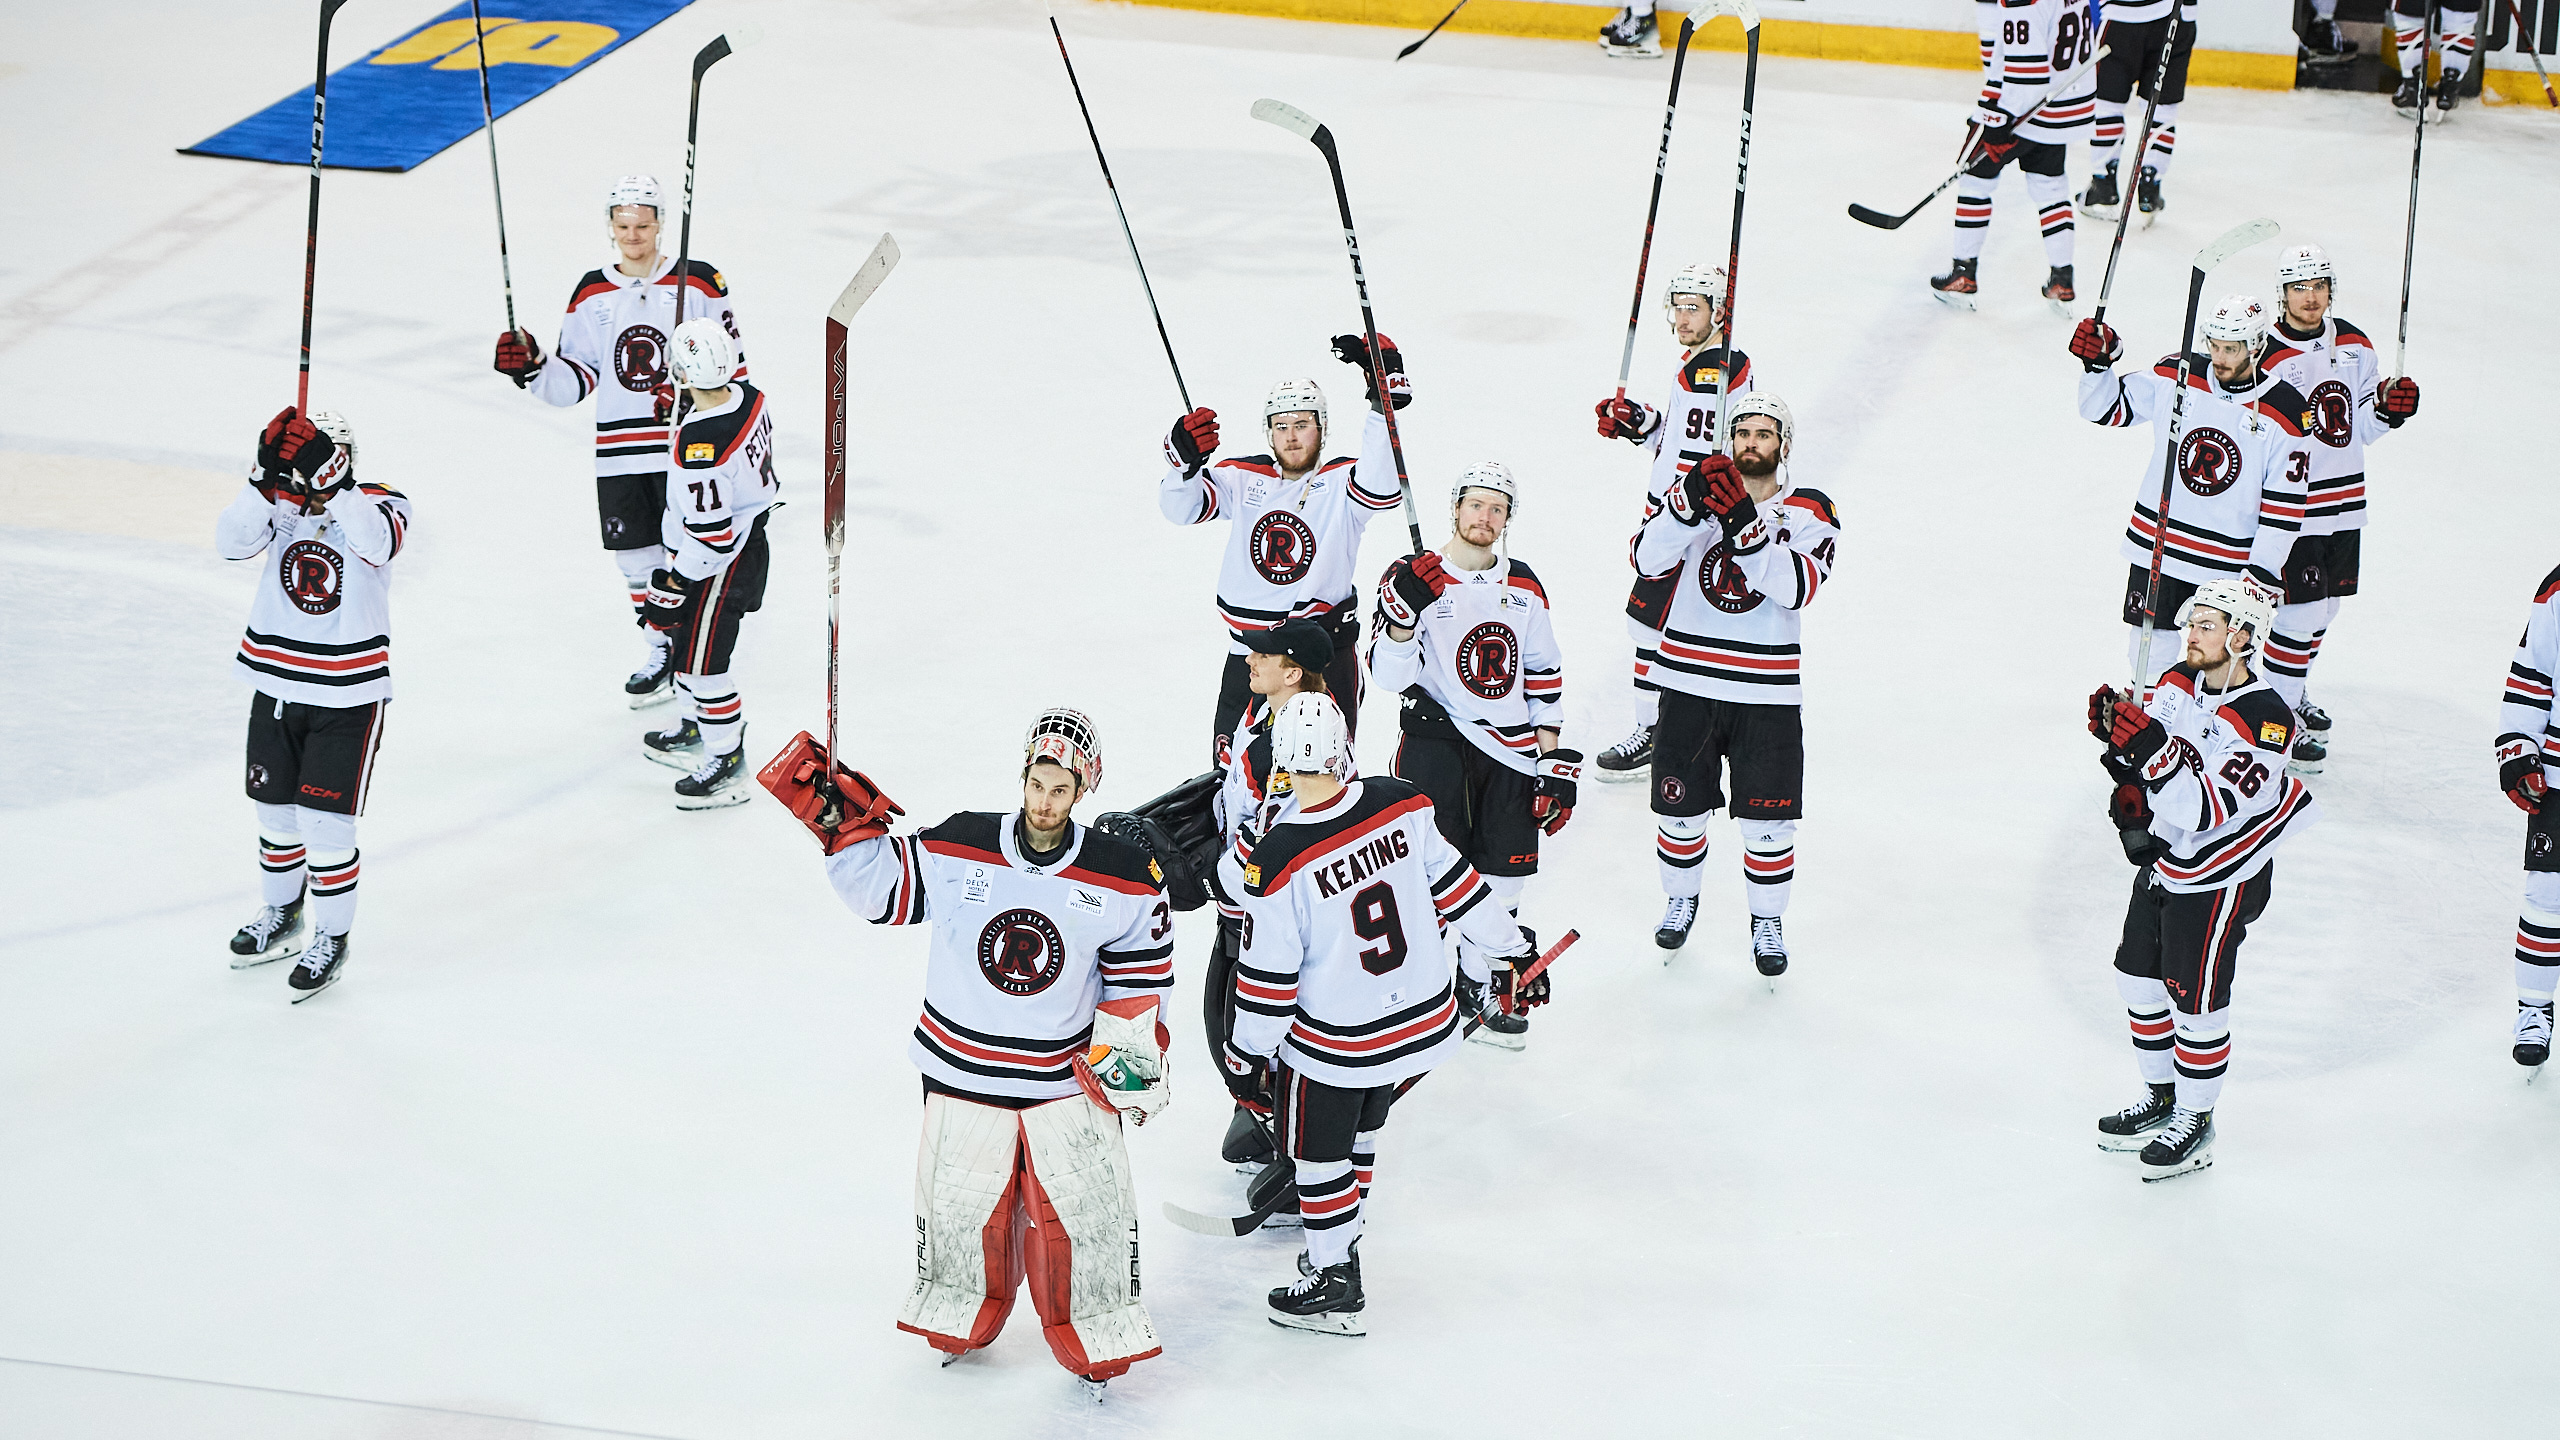 UNB Reds players celebrate the win lifting their sticks in the air